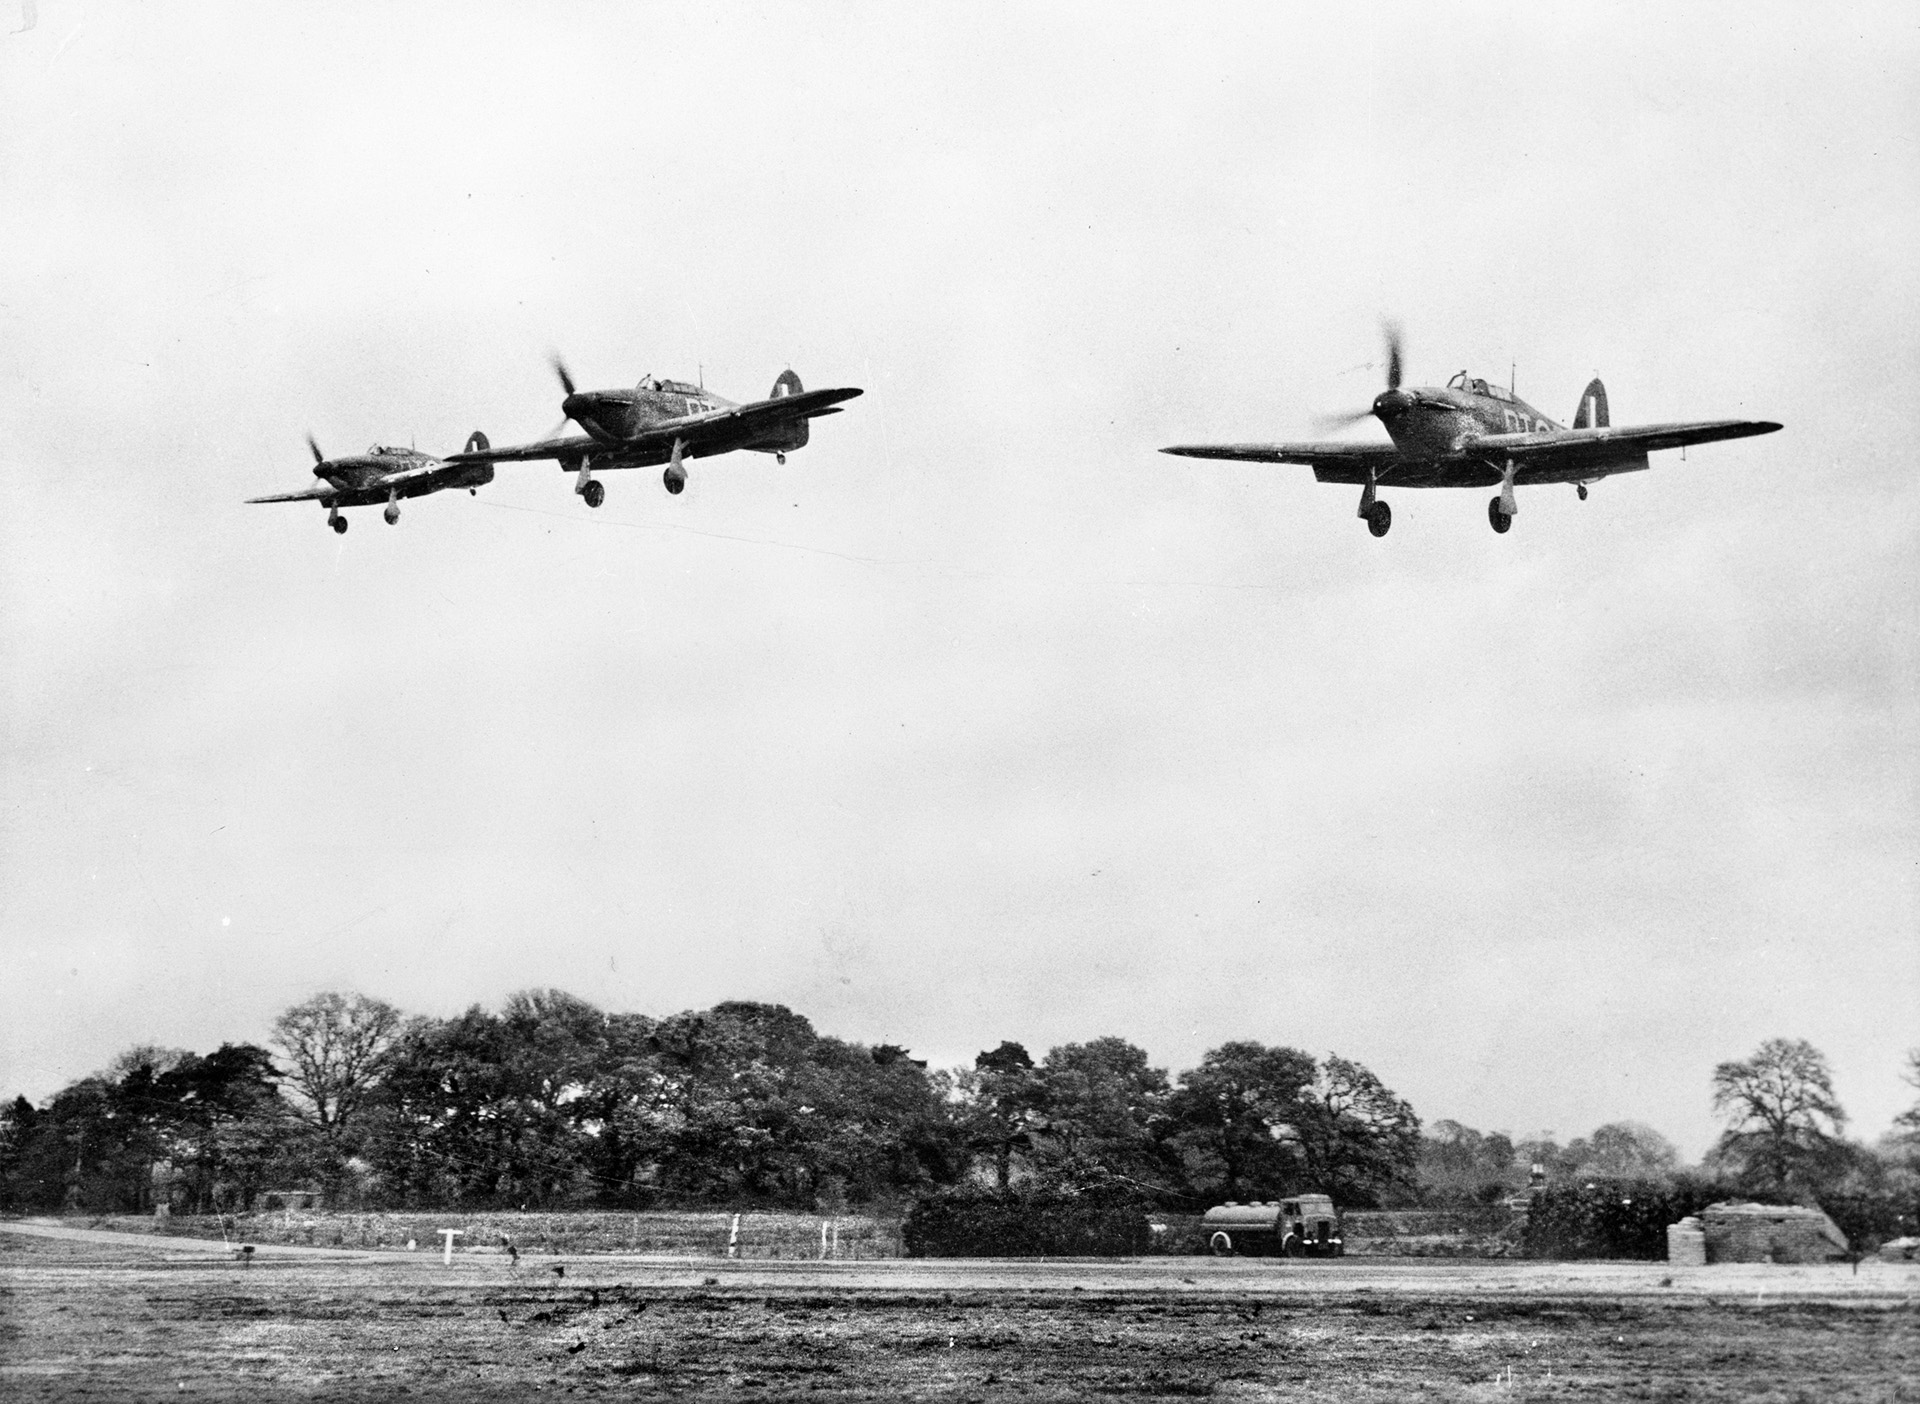 Flying the center aircraft in this trio of Hawker Hurricane fighters from No. 257 Squadron RAF, Squadron Leader Tuck guides the formation in for a landing at Martlesham Heath in November 1940.